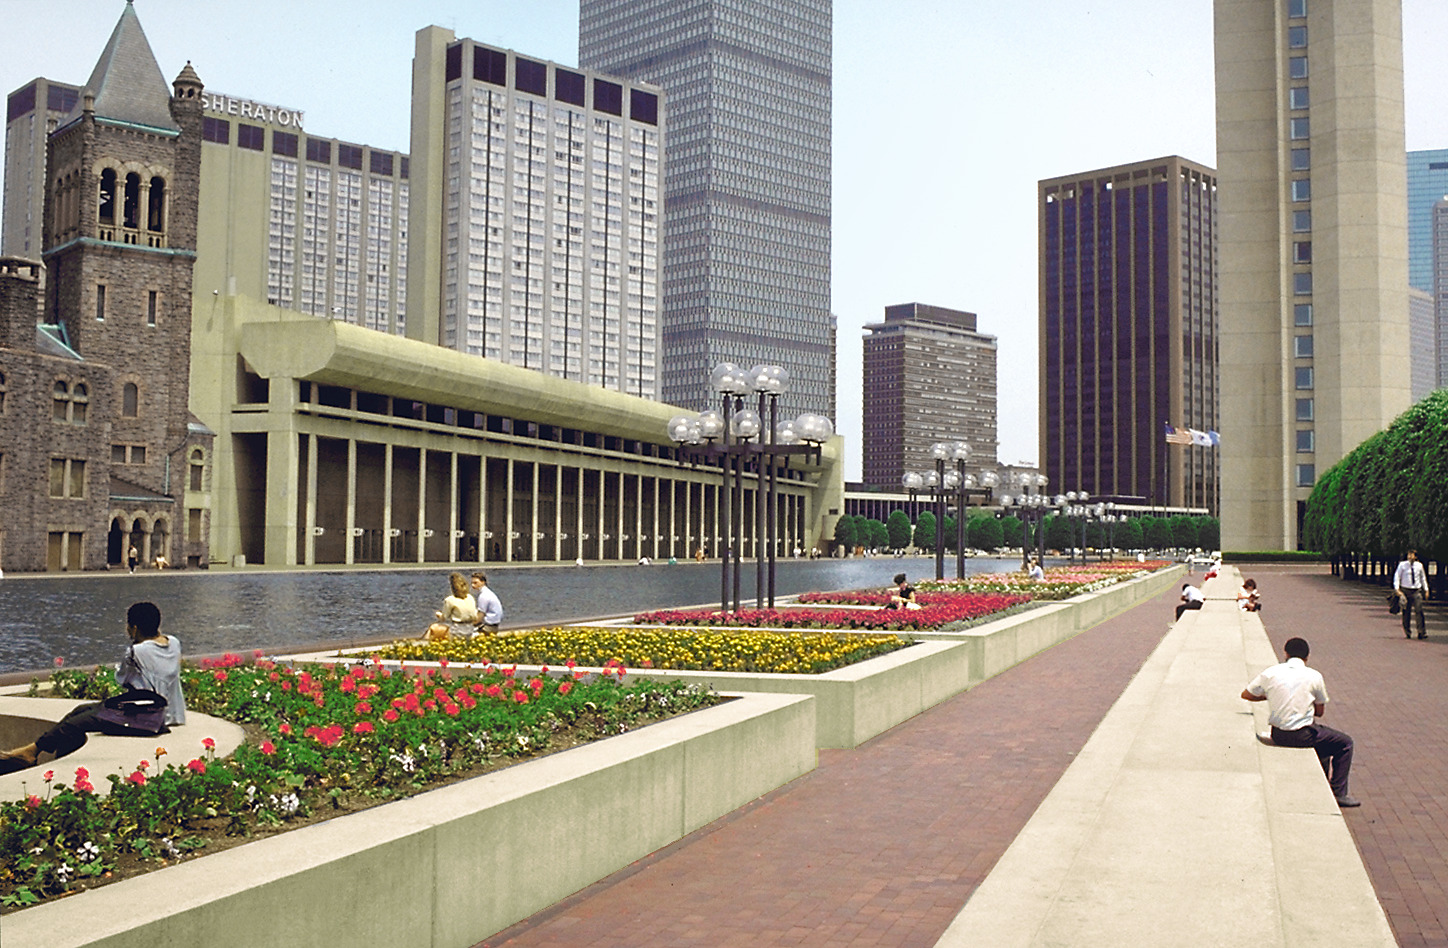 perspective photograph of square plantings with colorful flower beds bordering reflecting pool